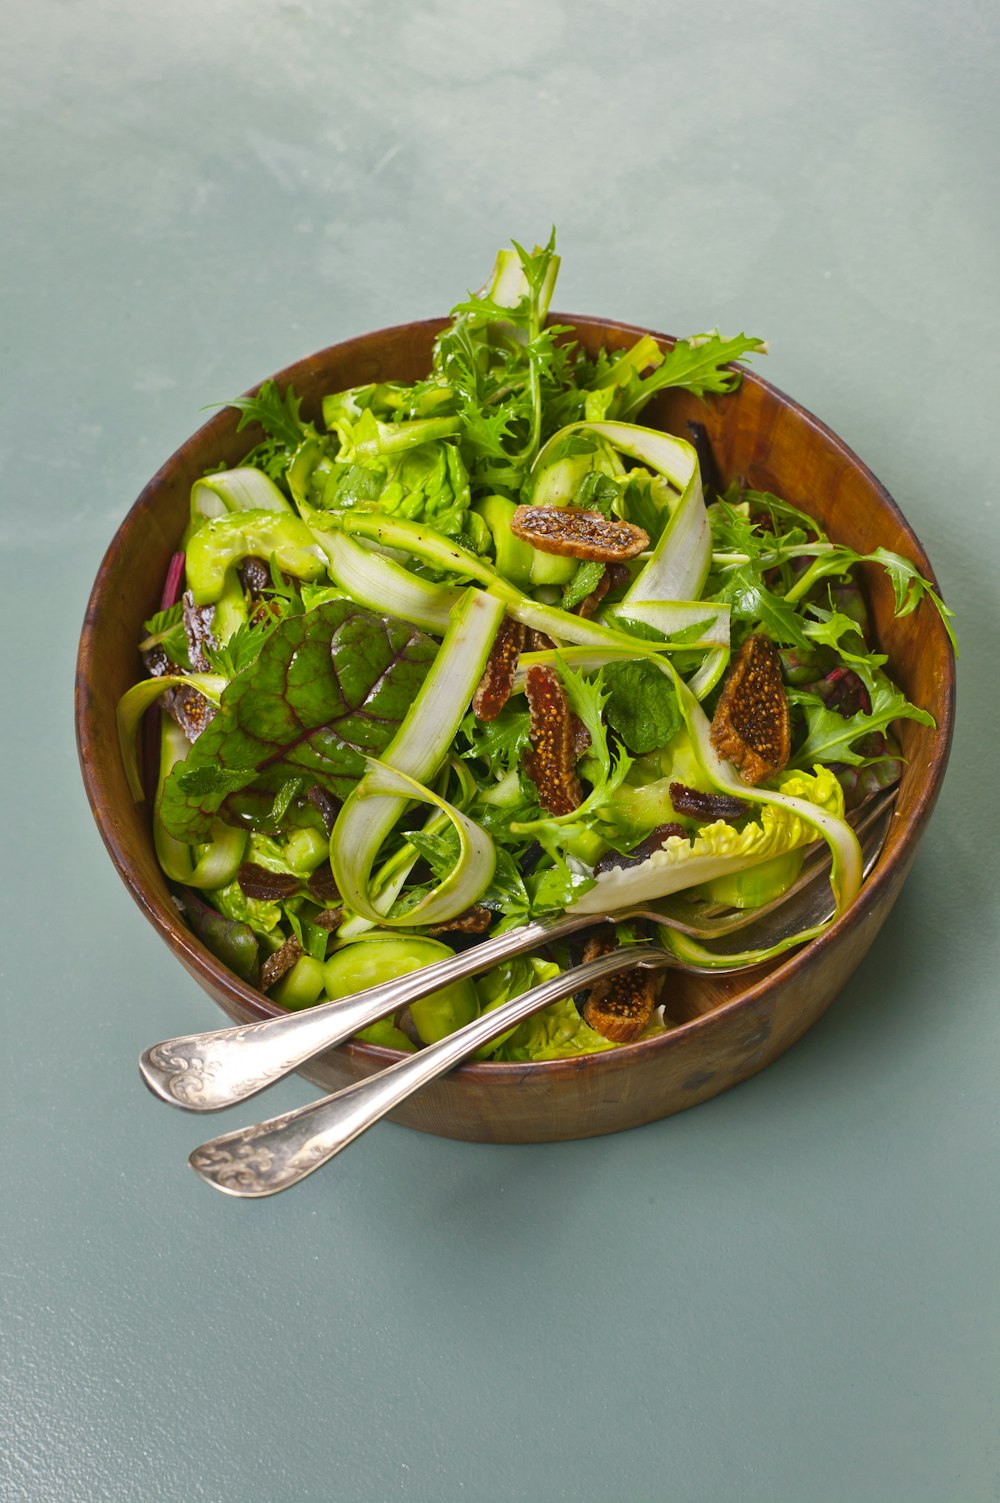 a wooden bowl filled with a salad and two spoons